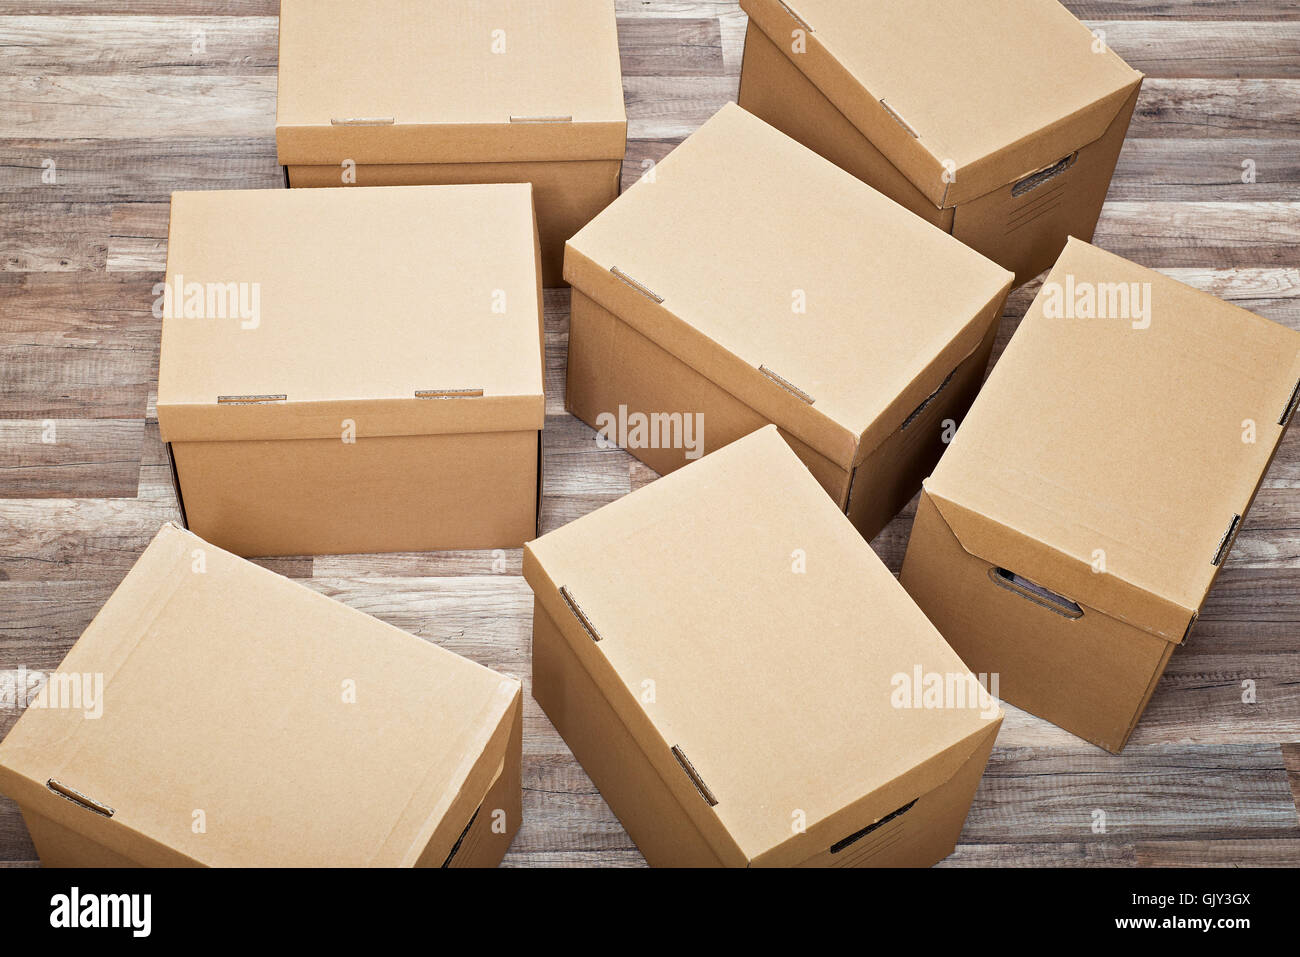 Many moving boxes on the floor Stock Photo